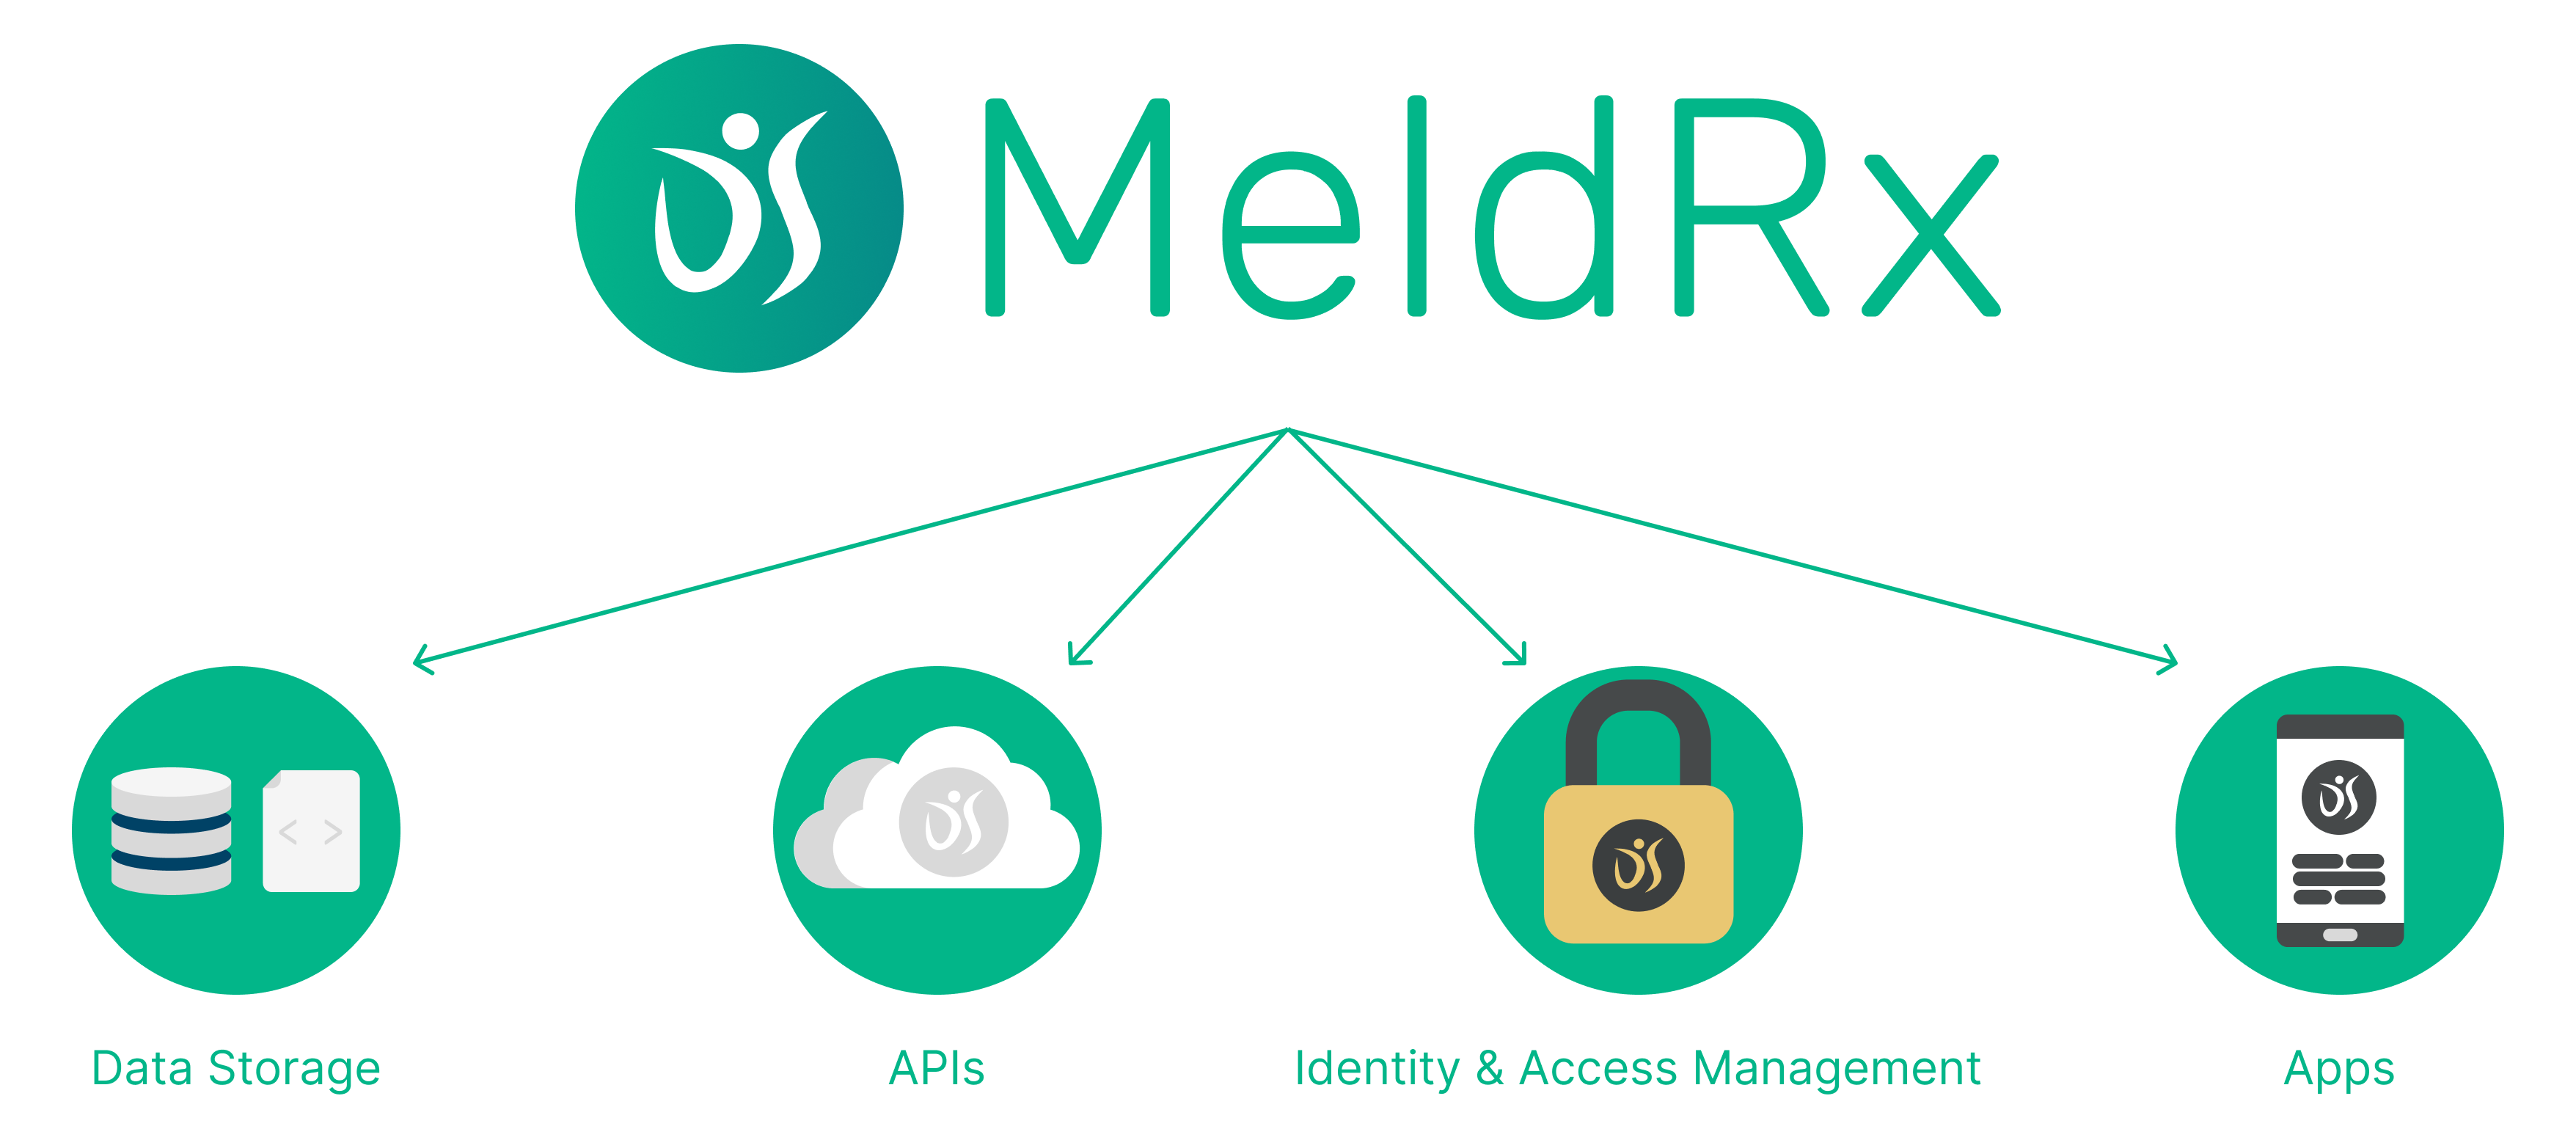 MeldRx Components